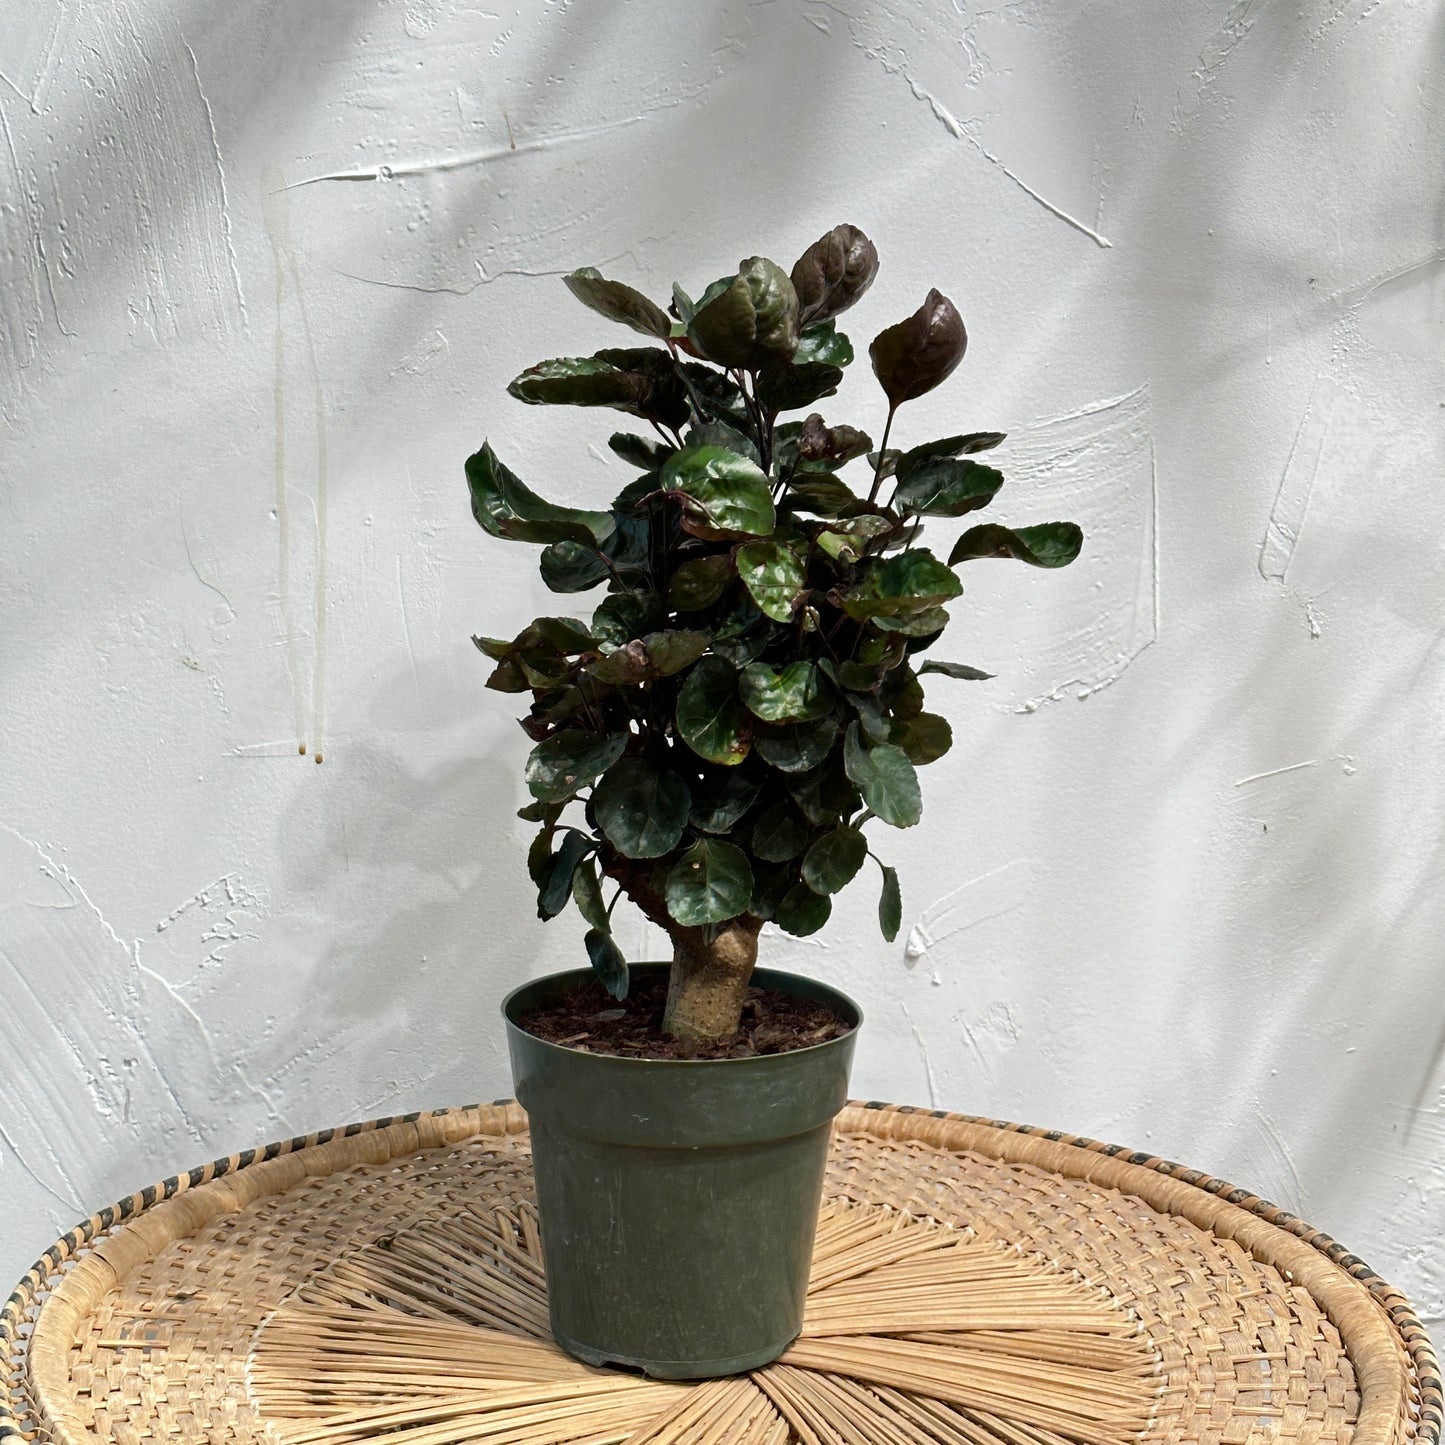 Balfour Aralia, Dinner Plate Plant (Polyscias scutellaria) in a 6 inch pot. Indoor plant for sale by Promise Supply for delivery and pickup in Toronto